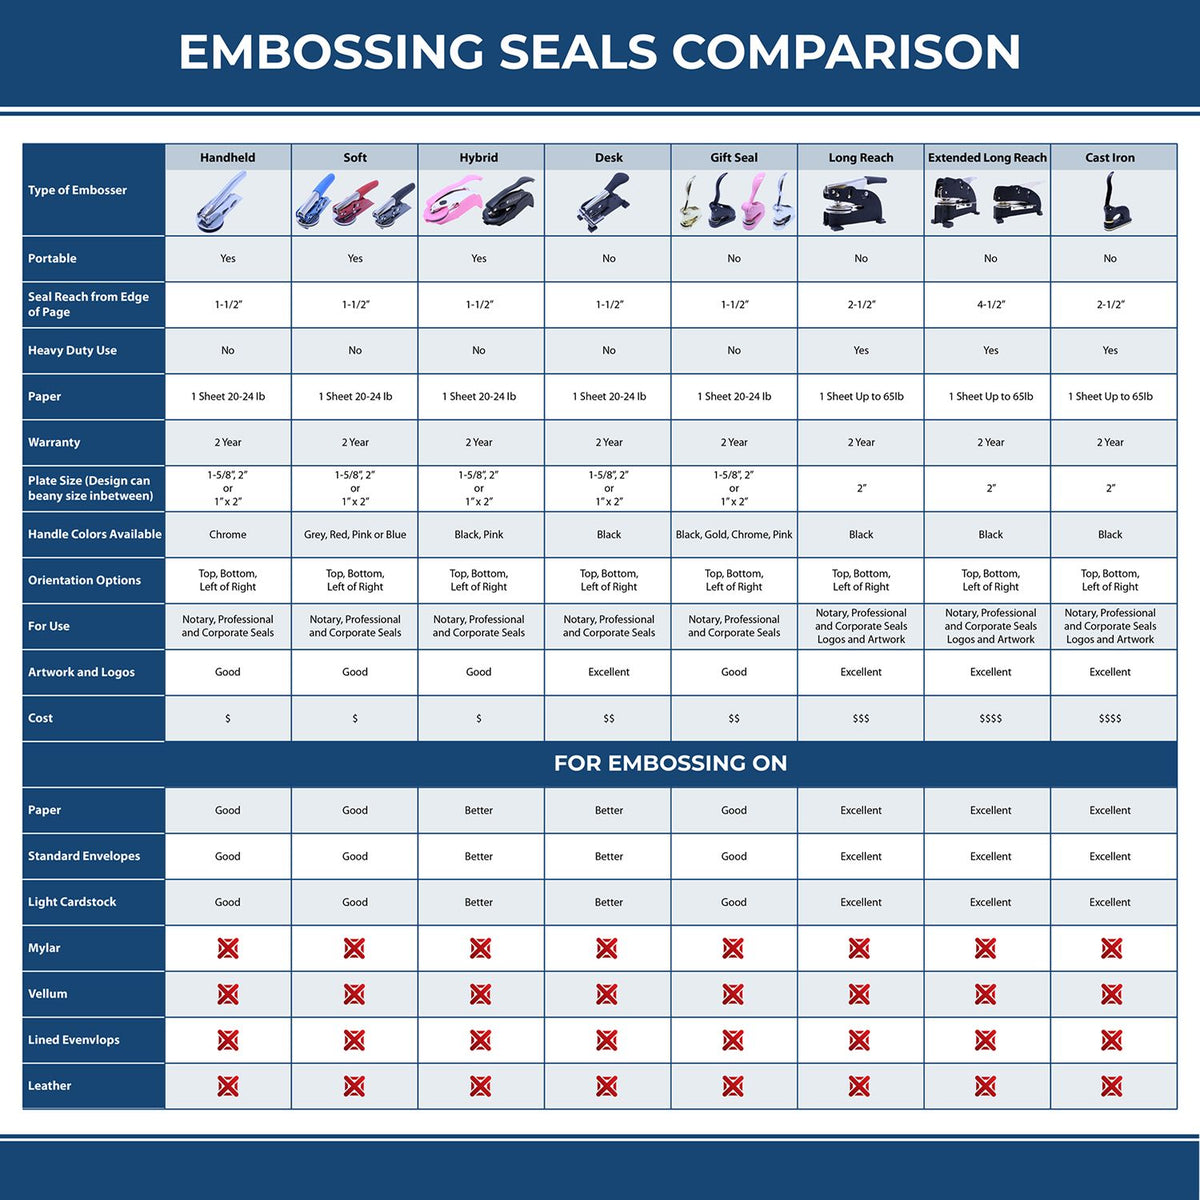 Public Weighmaster Soft Seal Embosser 3001WE-S Embossing Seal Comparison